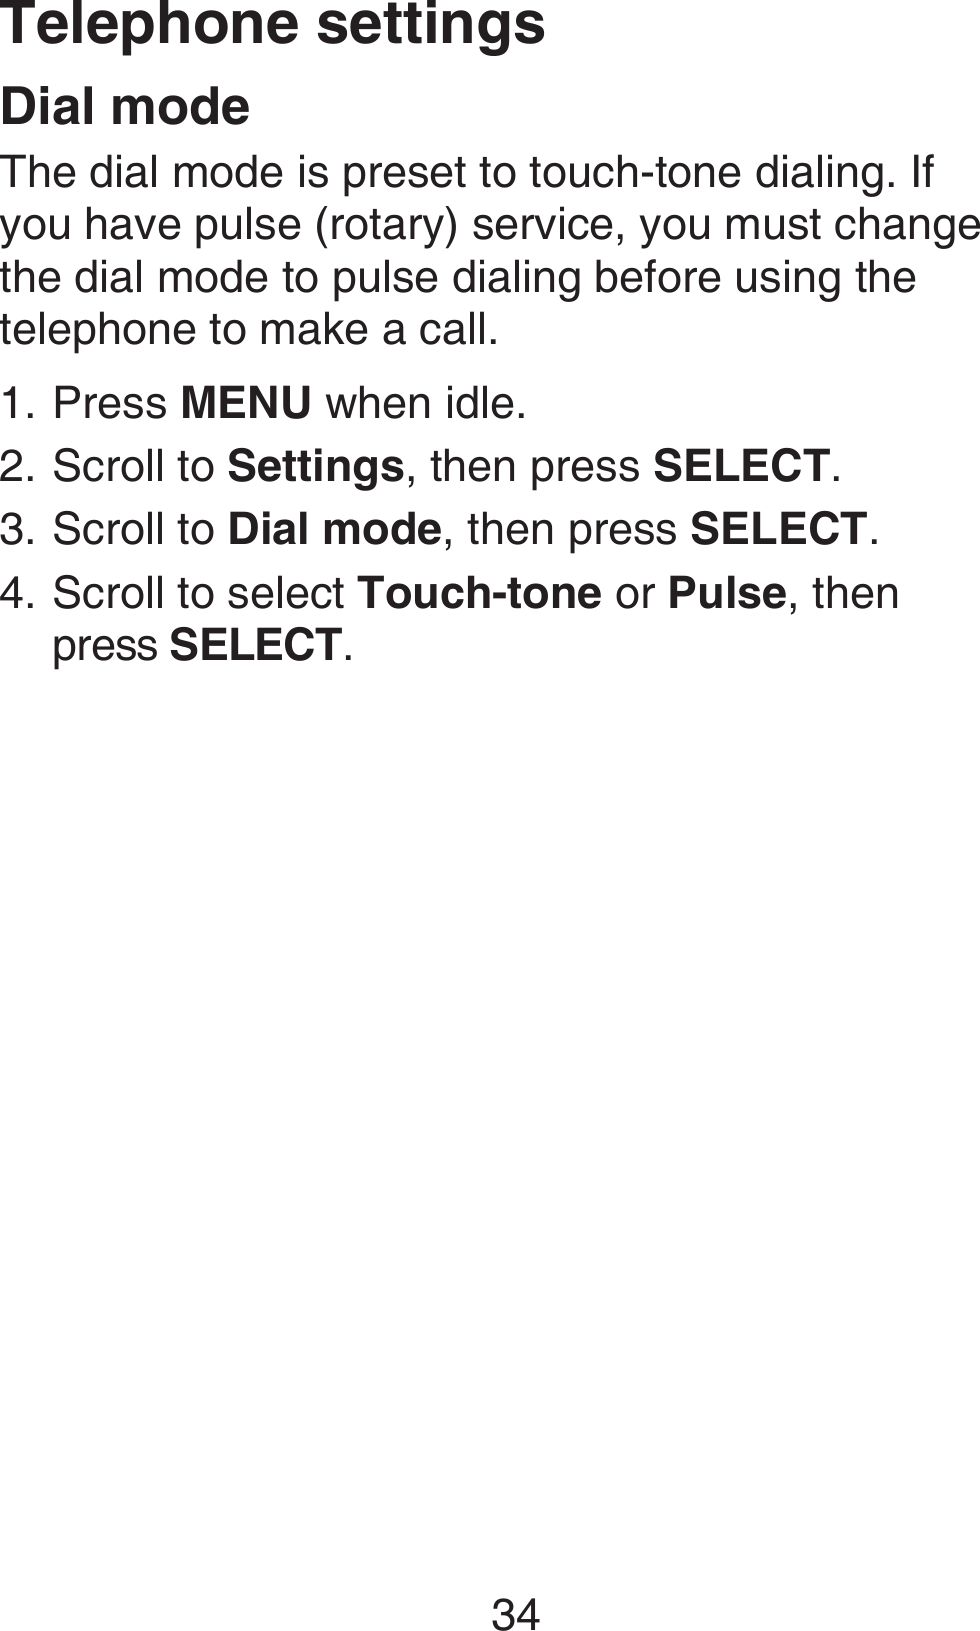 34Telephone settingsDial modeThe dial mode is preset to touch-tone dialing. If you have pulse (rotary) service, you must change the dial mode to pulse dialing before using the telephone to make a call.Press MENU when idle.Scroll to Settings, then press SELECT.Scroll to Dial mode, then press SELECT.Scroll to select Touch-tone or Pulse, then  press SELECT.1.2.3.4.